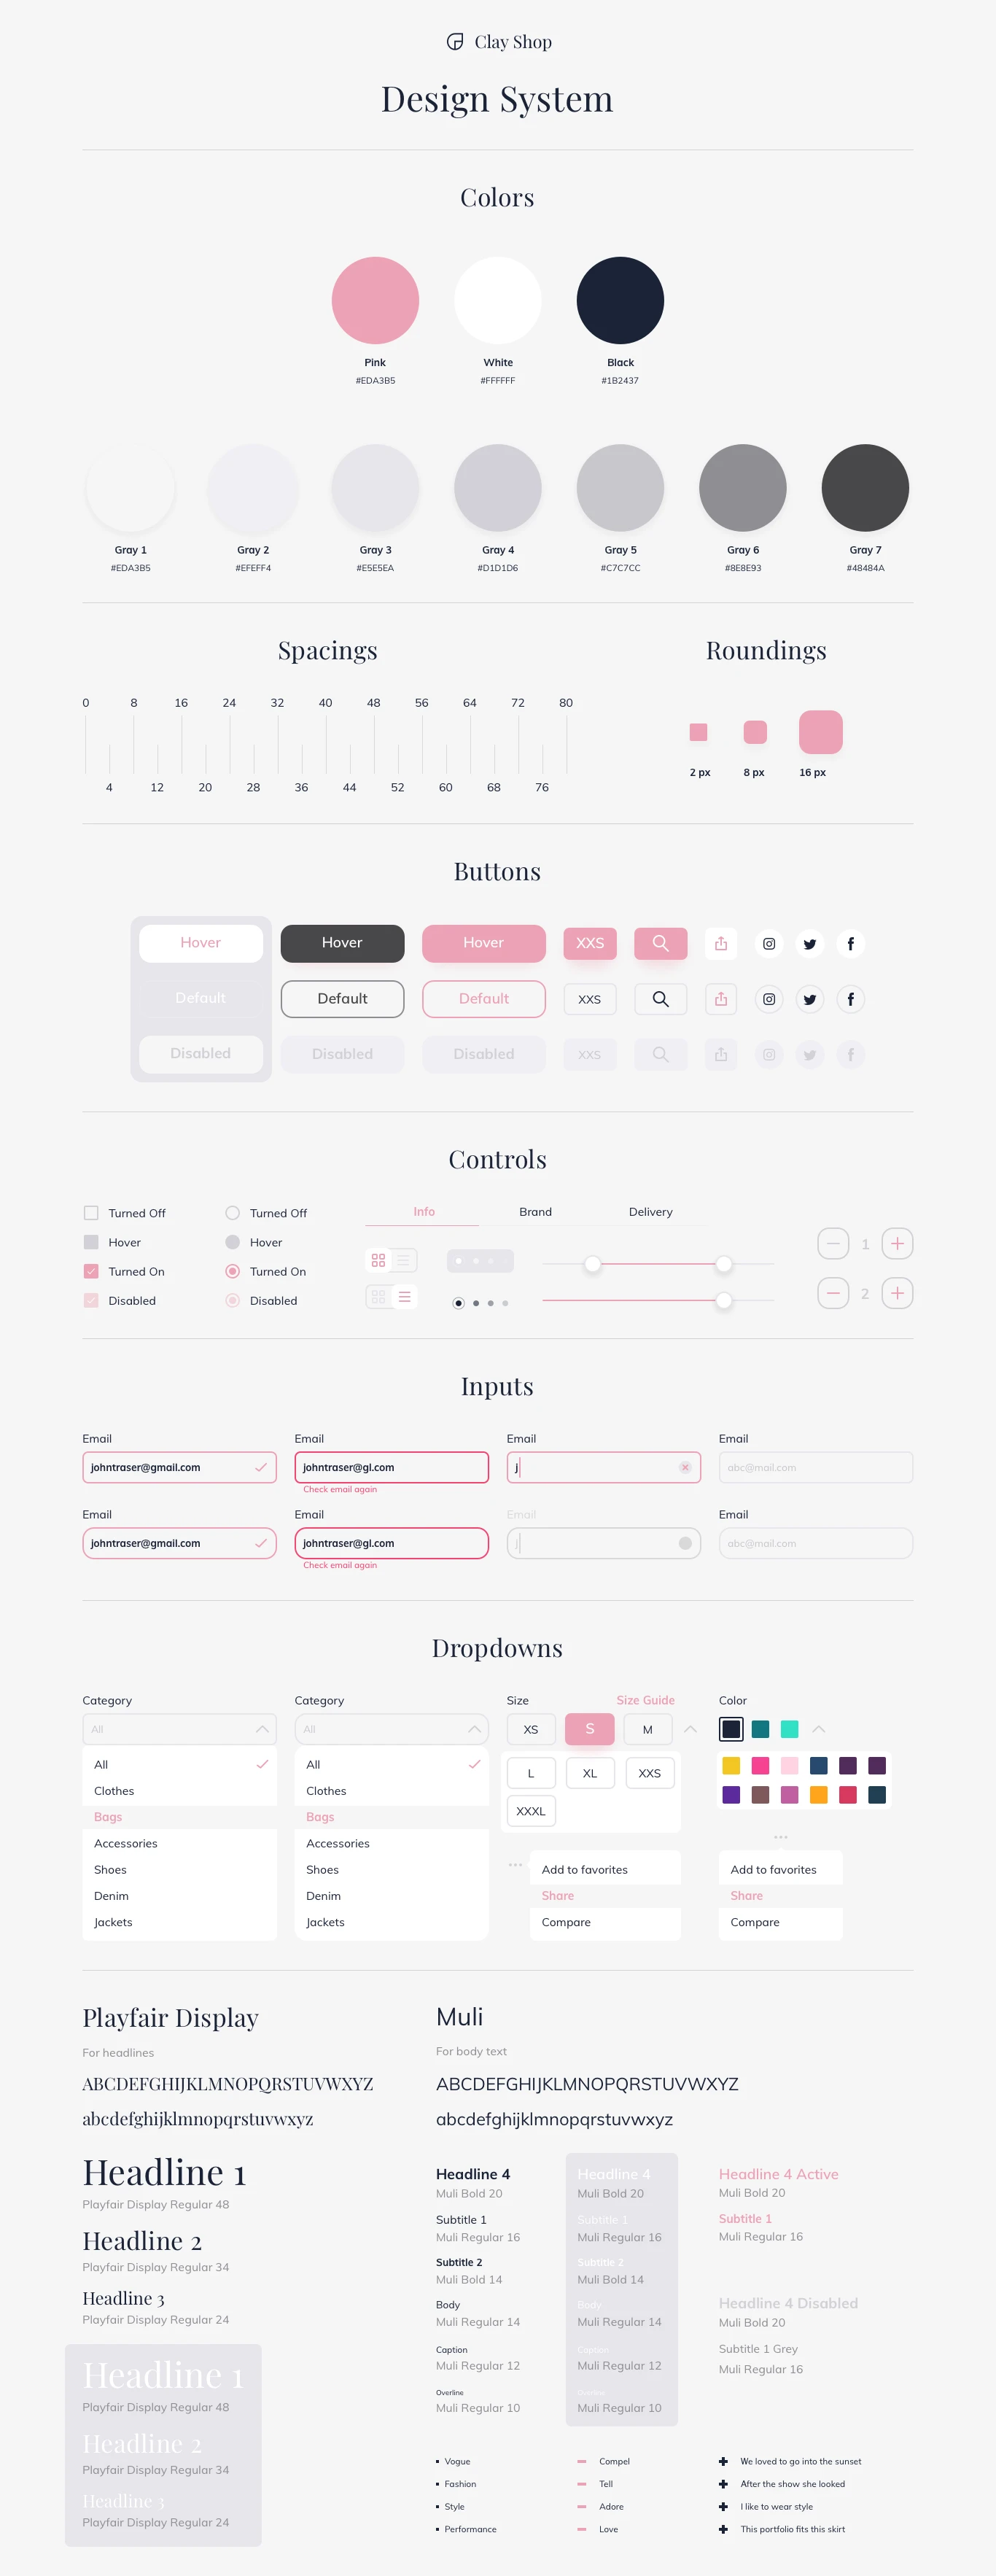 Clay Shop E-commerce UI Kit For Sketch - Ultimate e-commerce UI Kit with 5 pages and 60+ Components. Easy to resize and customize. All components carefully named sorted. With free Google fonts.